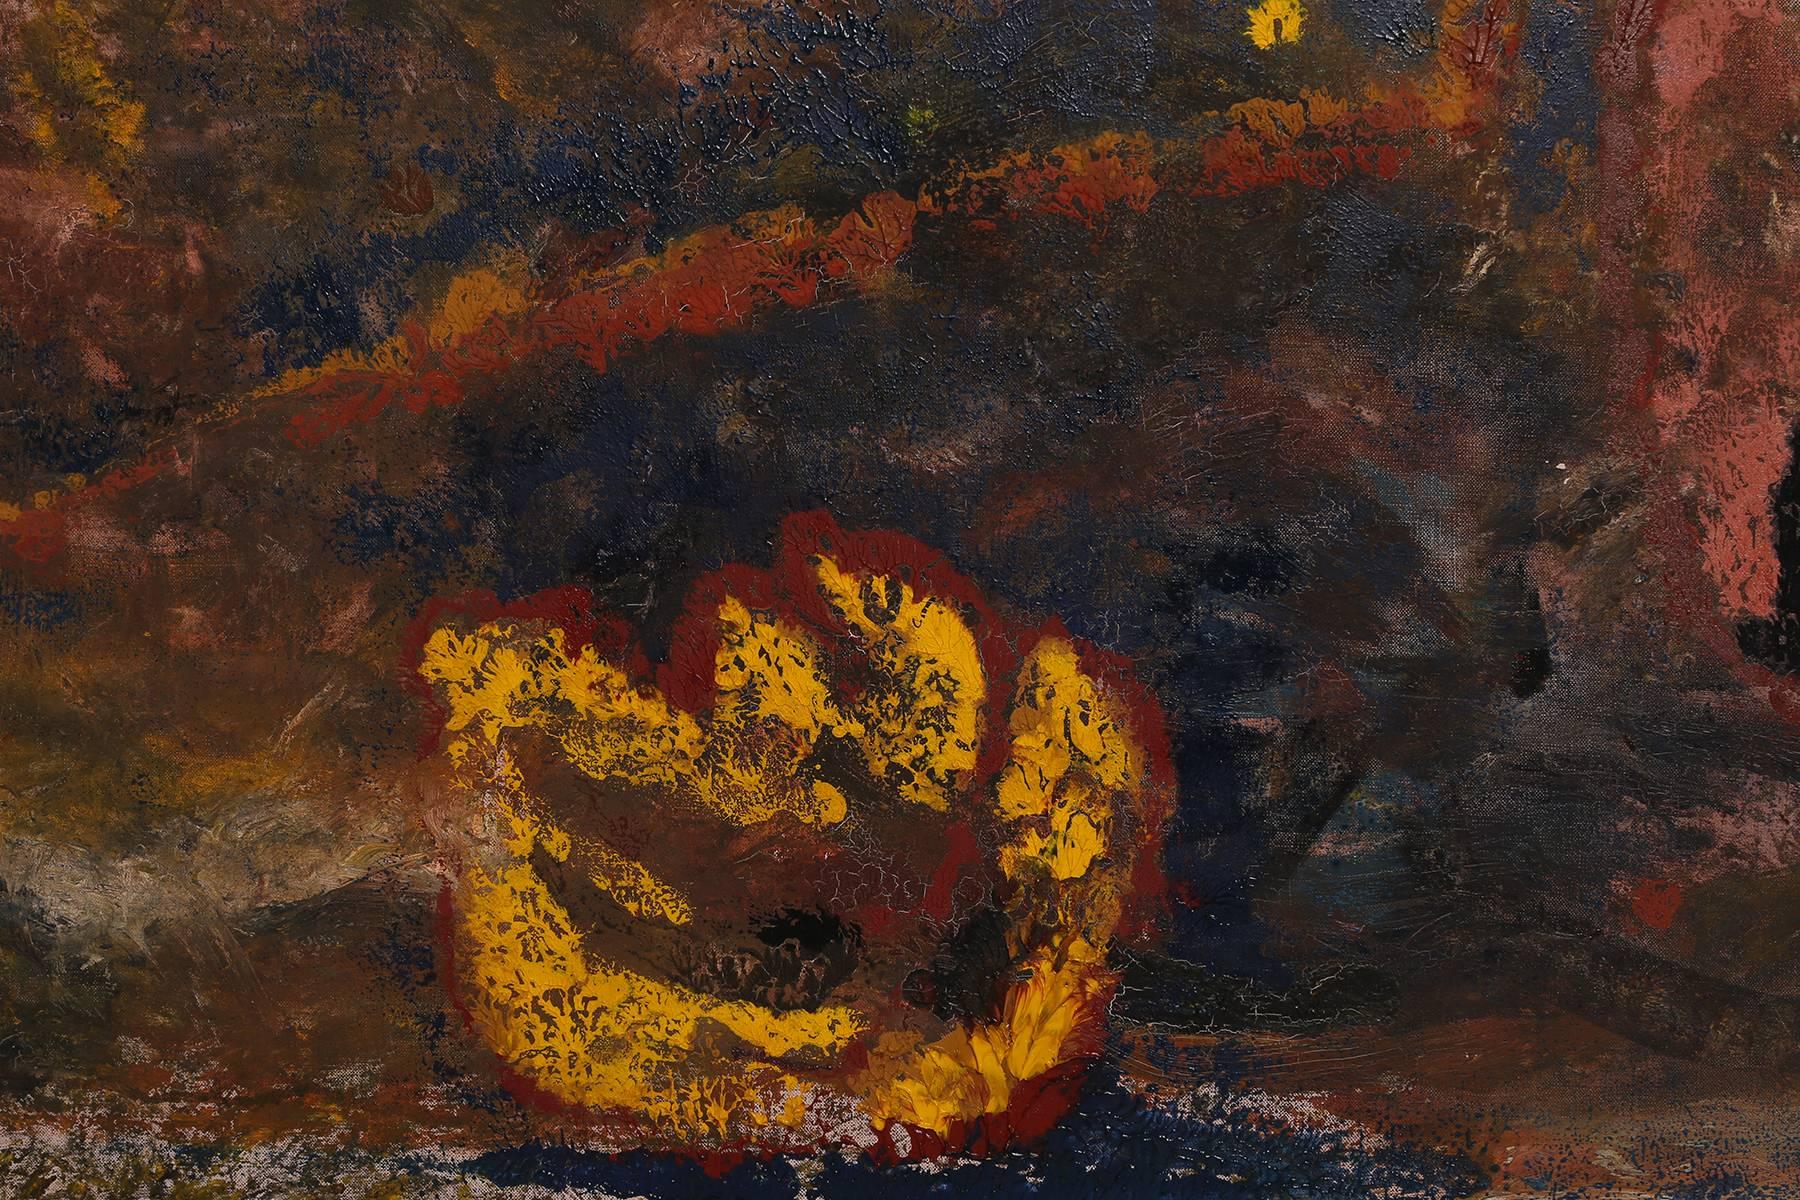 Textured abstract oil painting by Steven Sles, circa early 1960s. Sles was an accomplished artist who exhibited internationally and is in permanent private and museum collections. He had cerebral palsy and taught himself how to paint with his mouth.